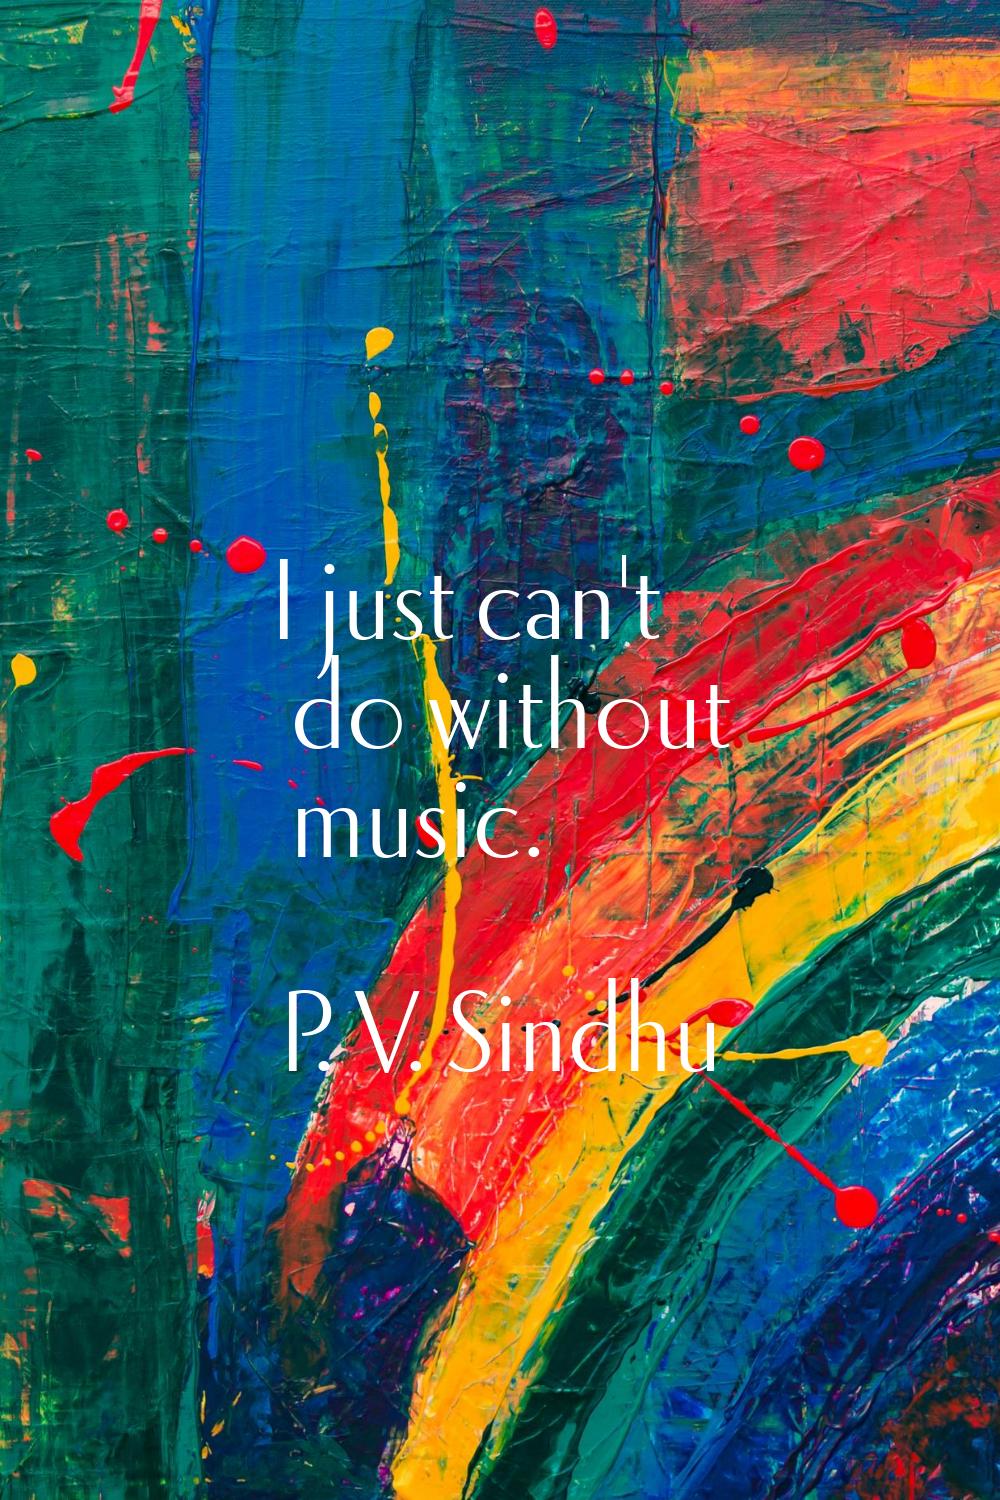 I just can't do without music.